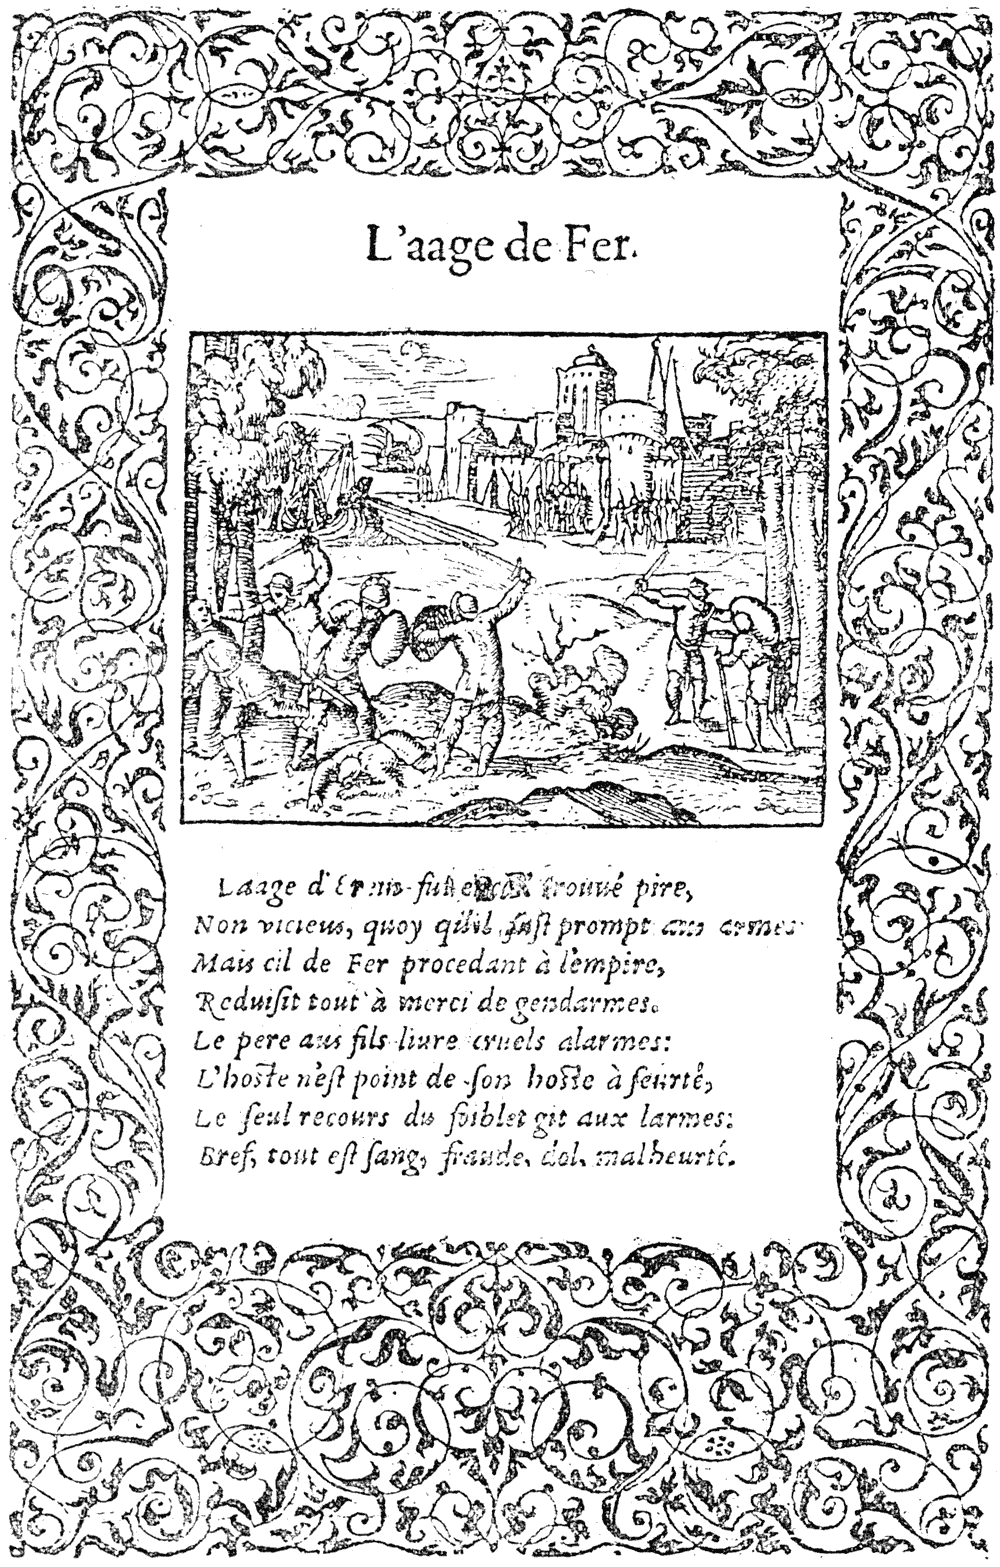 Page of the 'Metamorphoses' of Ovid, by Petit Bernard, printer of Lyons. Edition of 1564.  From Henri Bouchot 'The Printed Book' 1887, page 127, published size 8.2 cm wide by 12.9 cm.